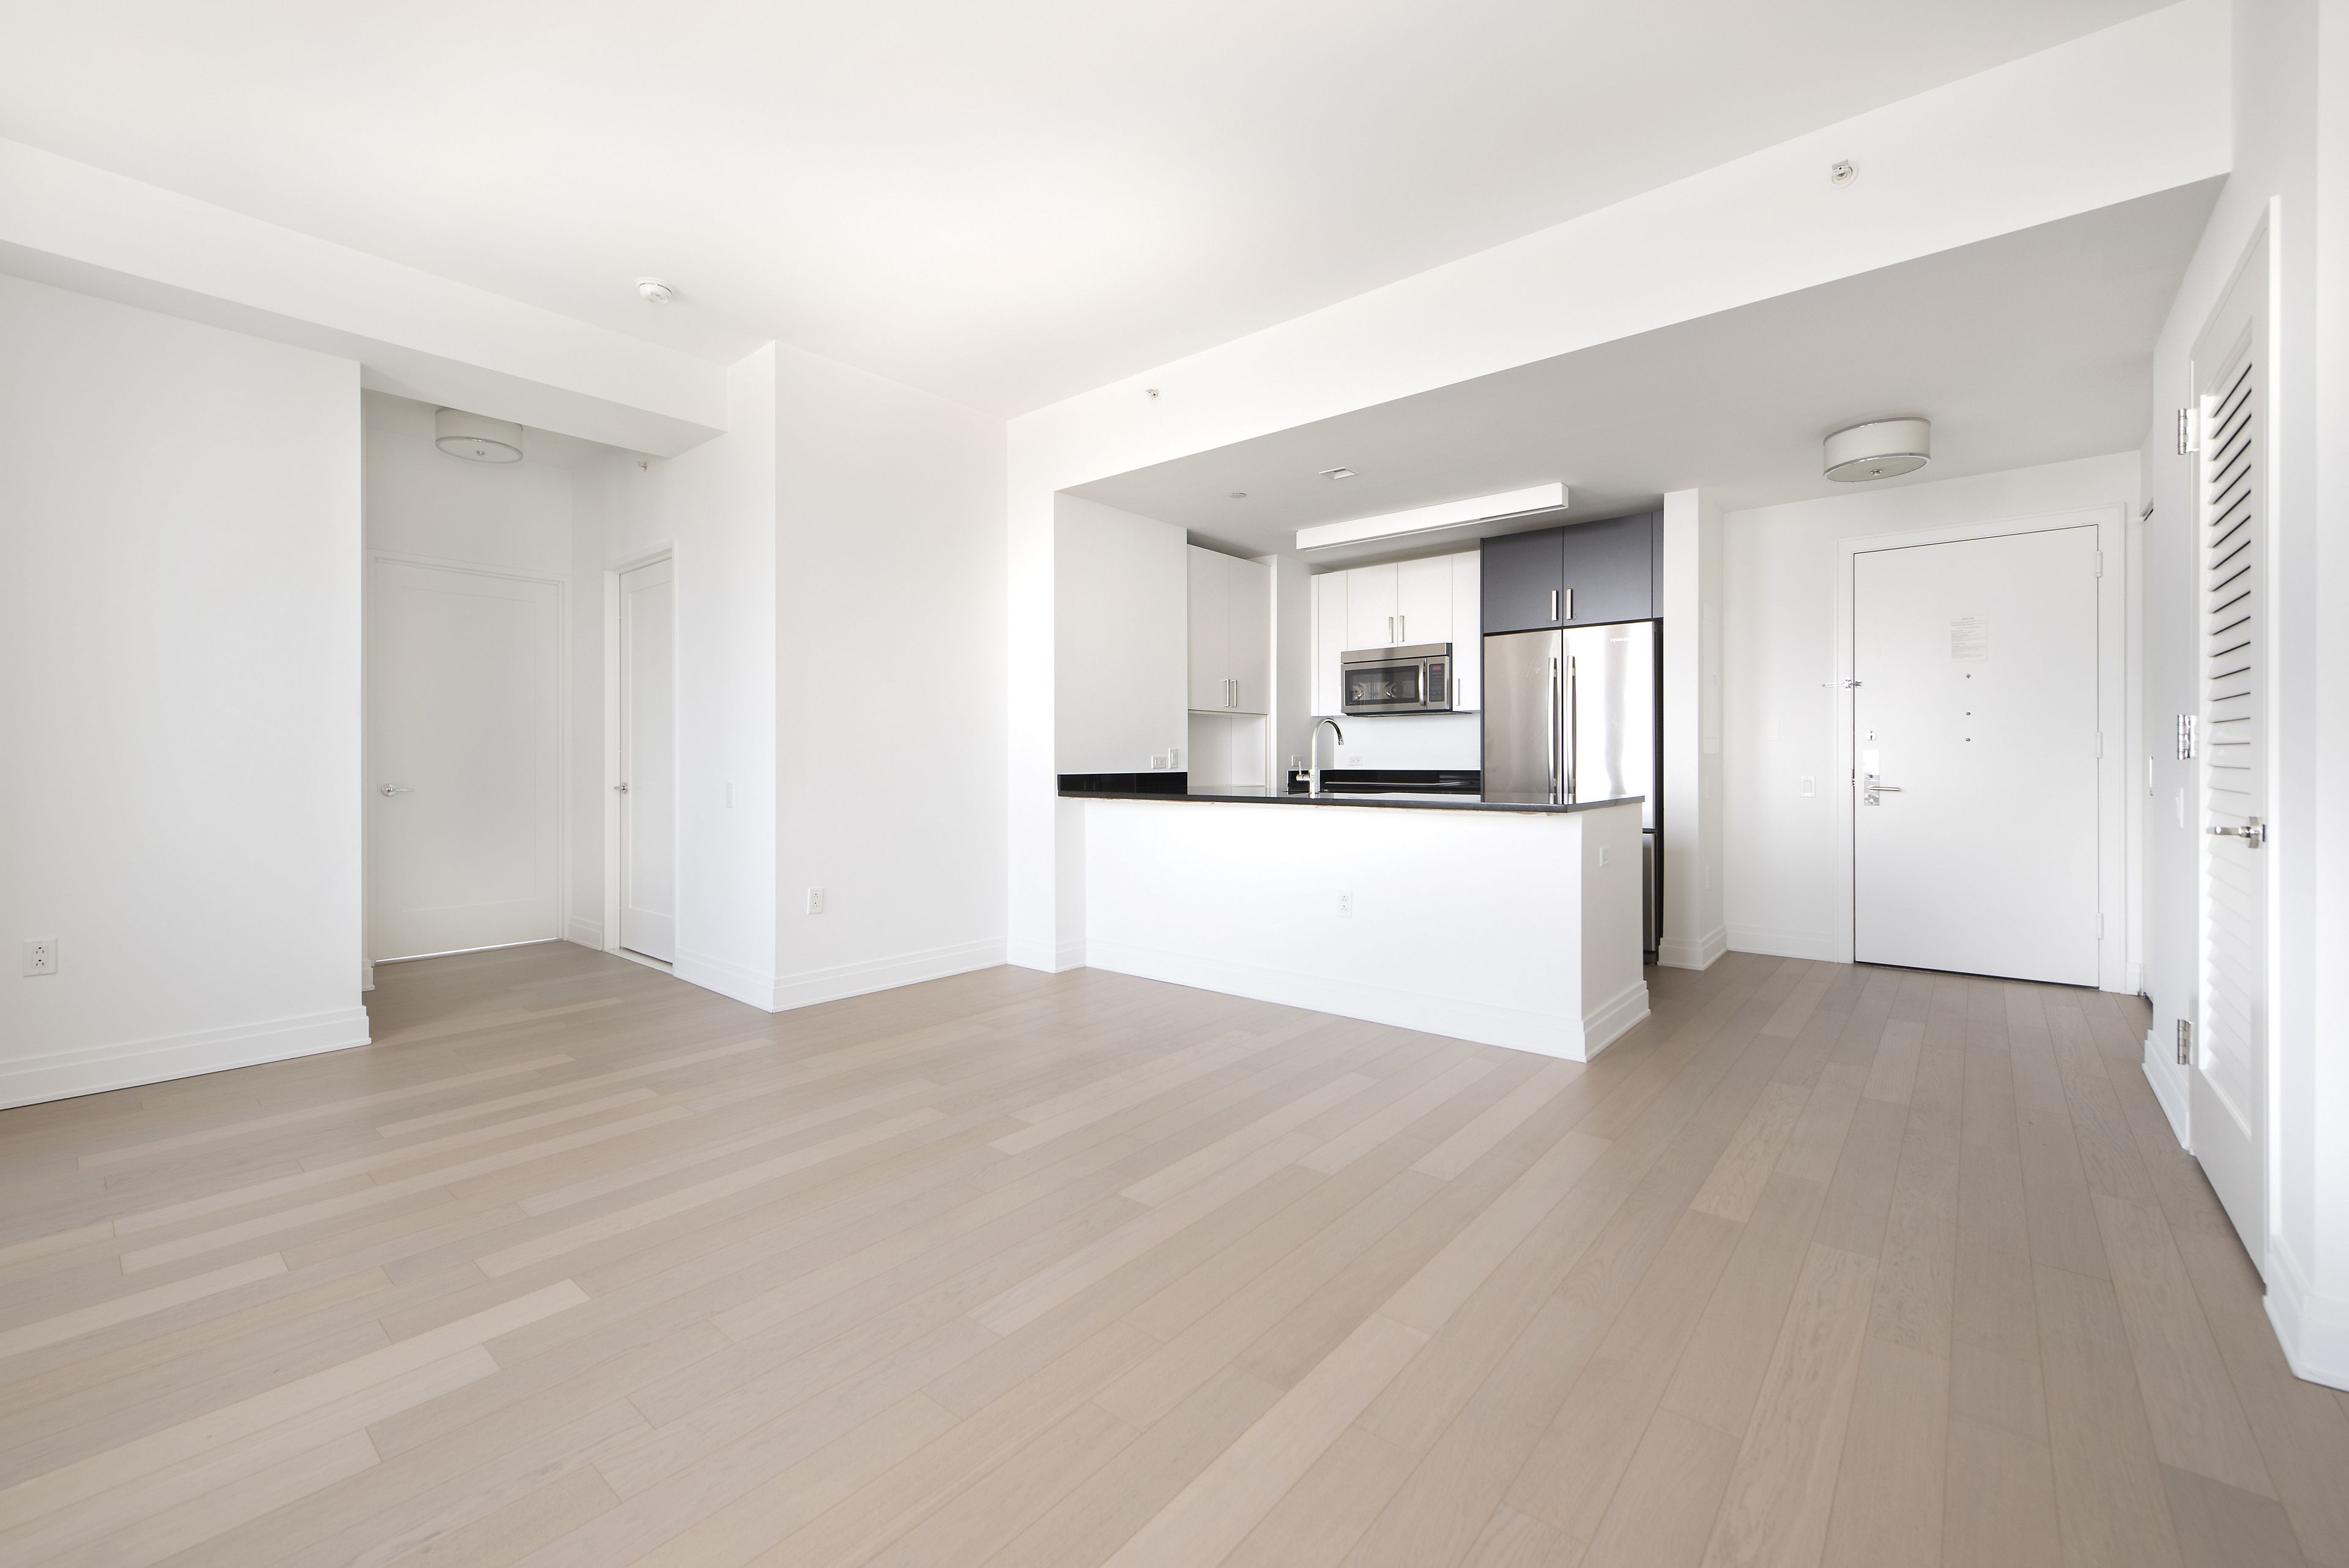 70 Pine Street 2805, Financial District, Downtown, NYC - 2 Bedrooms  
2 Bathrooms  
4 Rooms - 